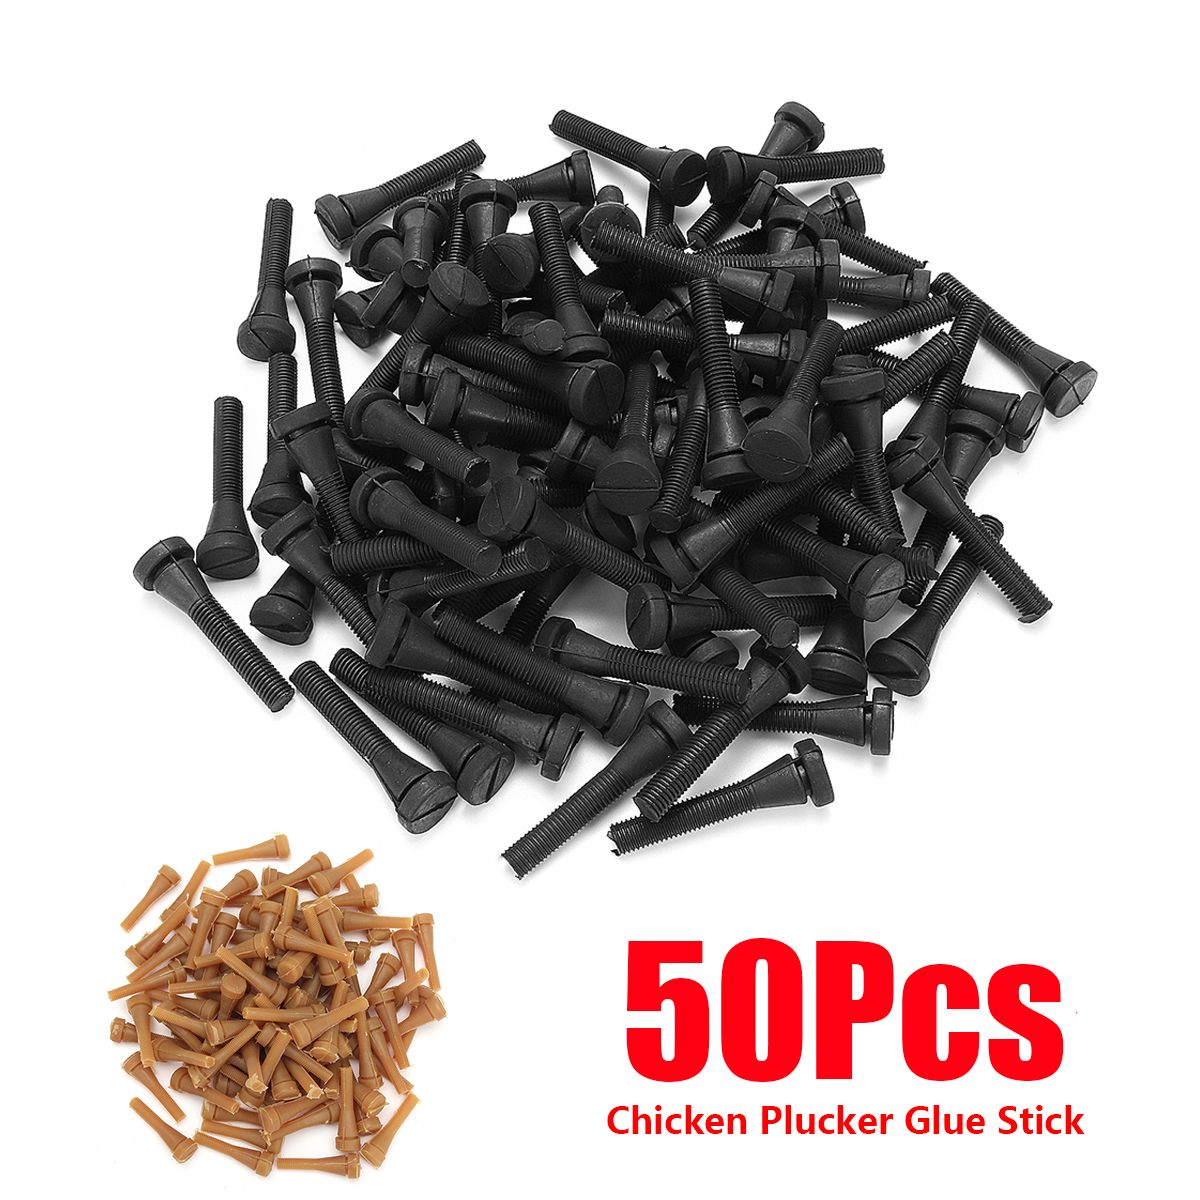 50Pcs-Chicken-Geese-Poultry-Plucking-Fingers-Plucker-Picker-Hair-Removal-Stick-Machine-Accessories-f-1529967